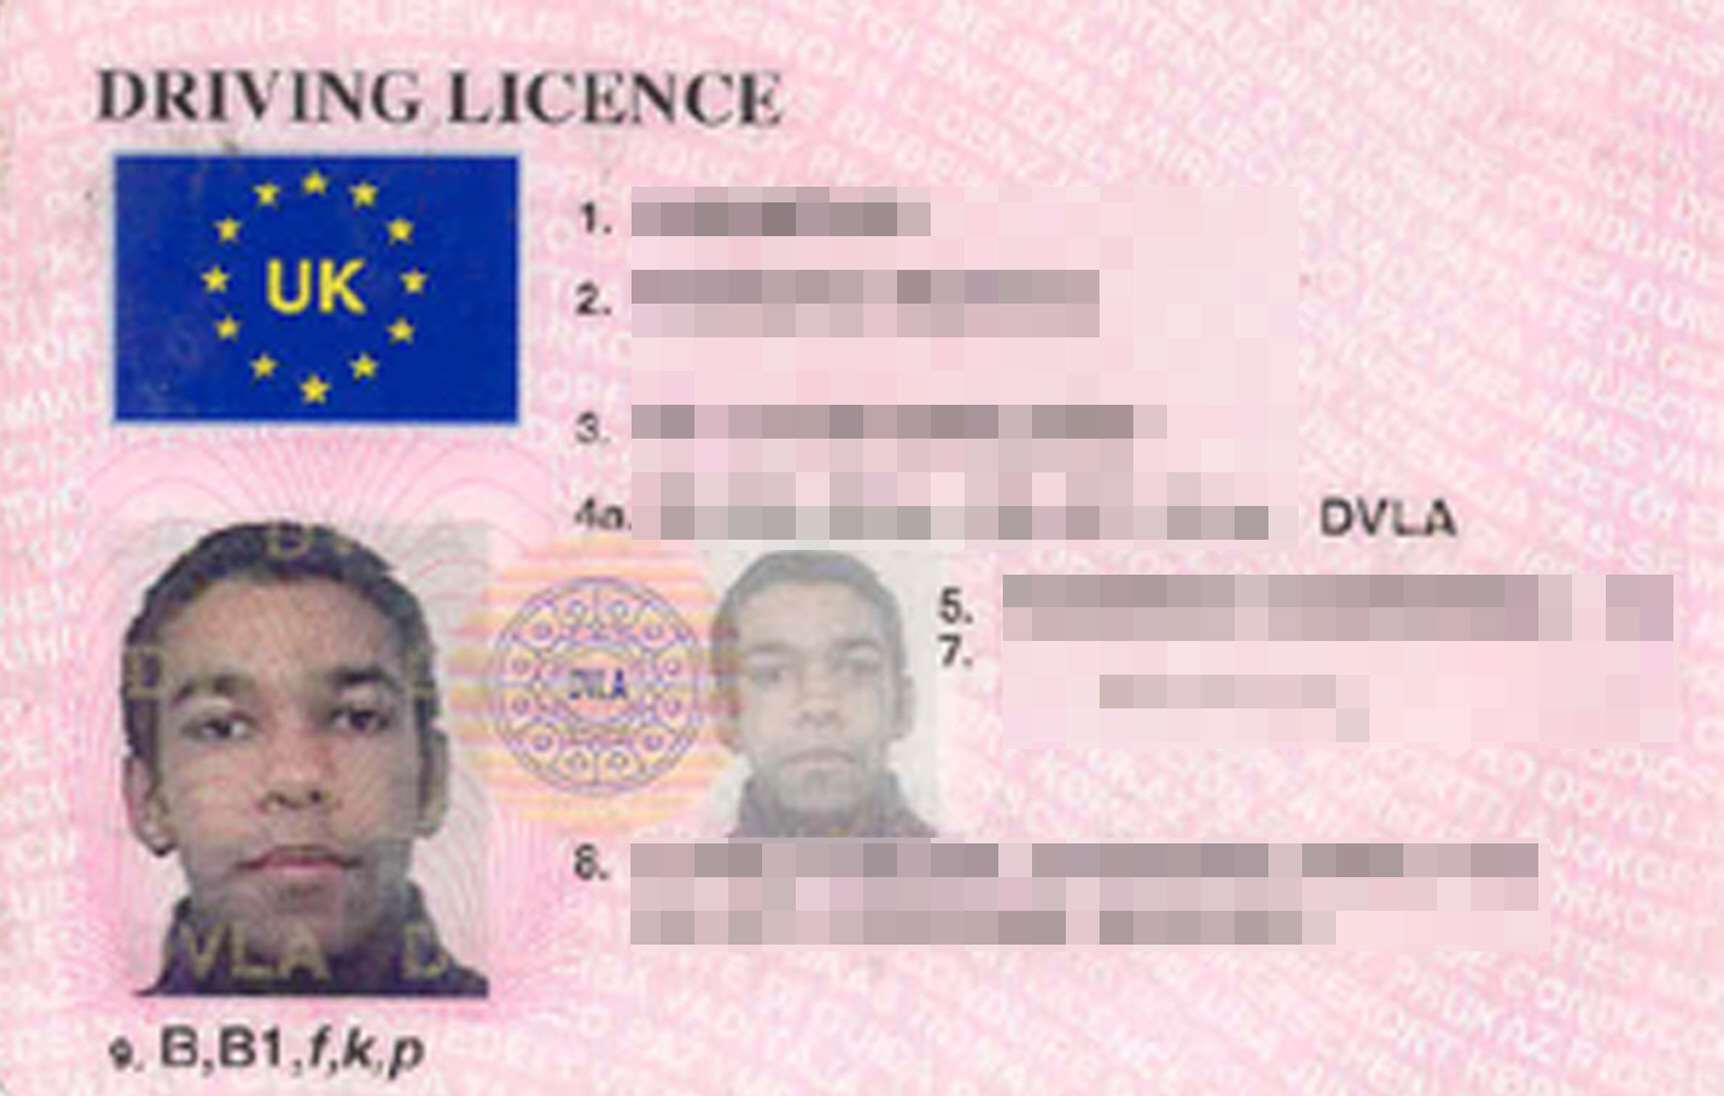 A typical driving licence